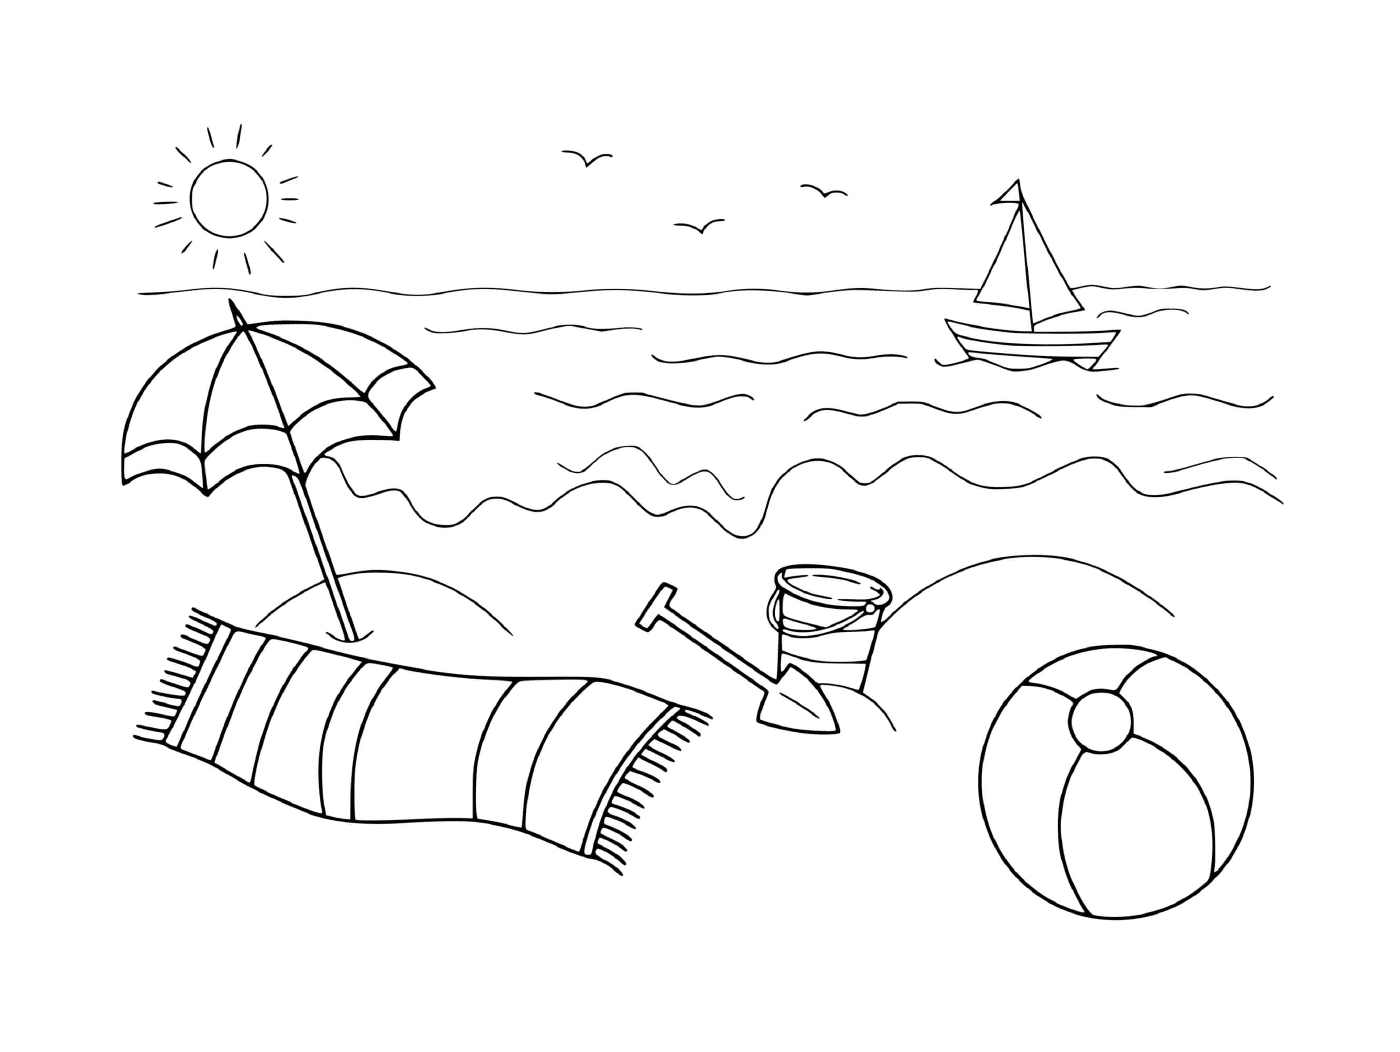  The sea under a warm sun with a boat 